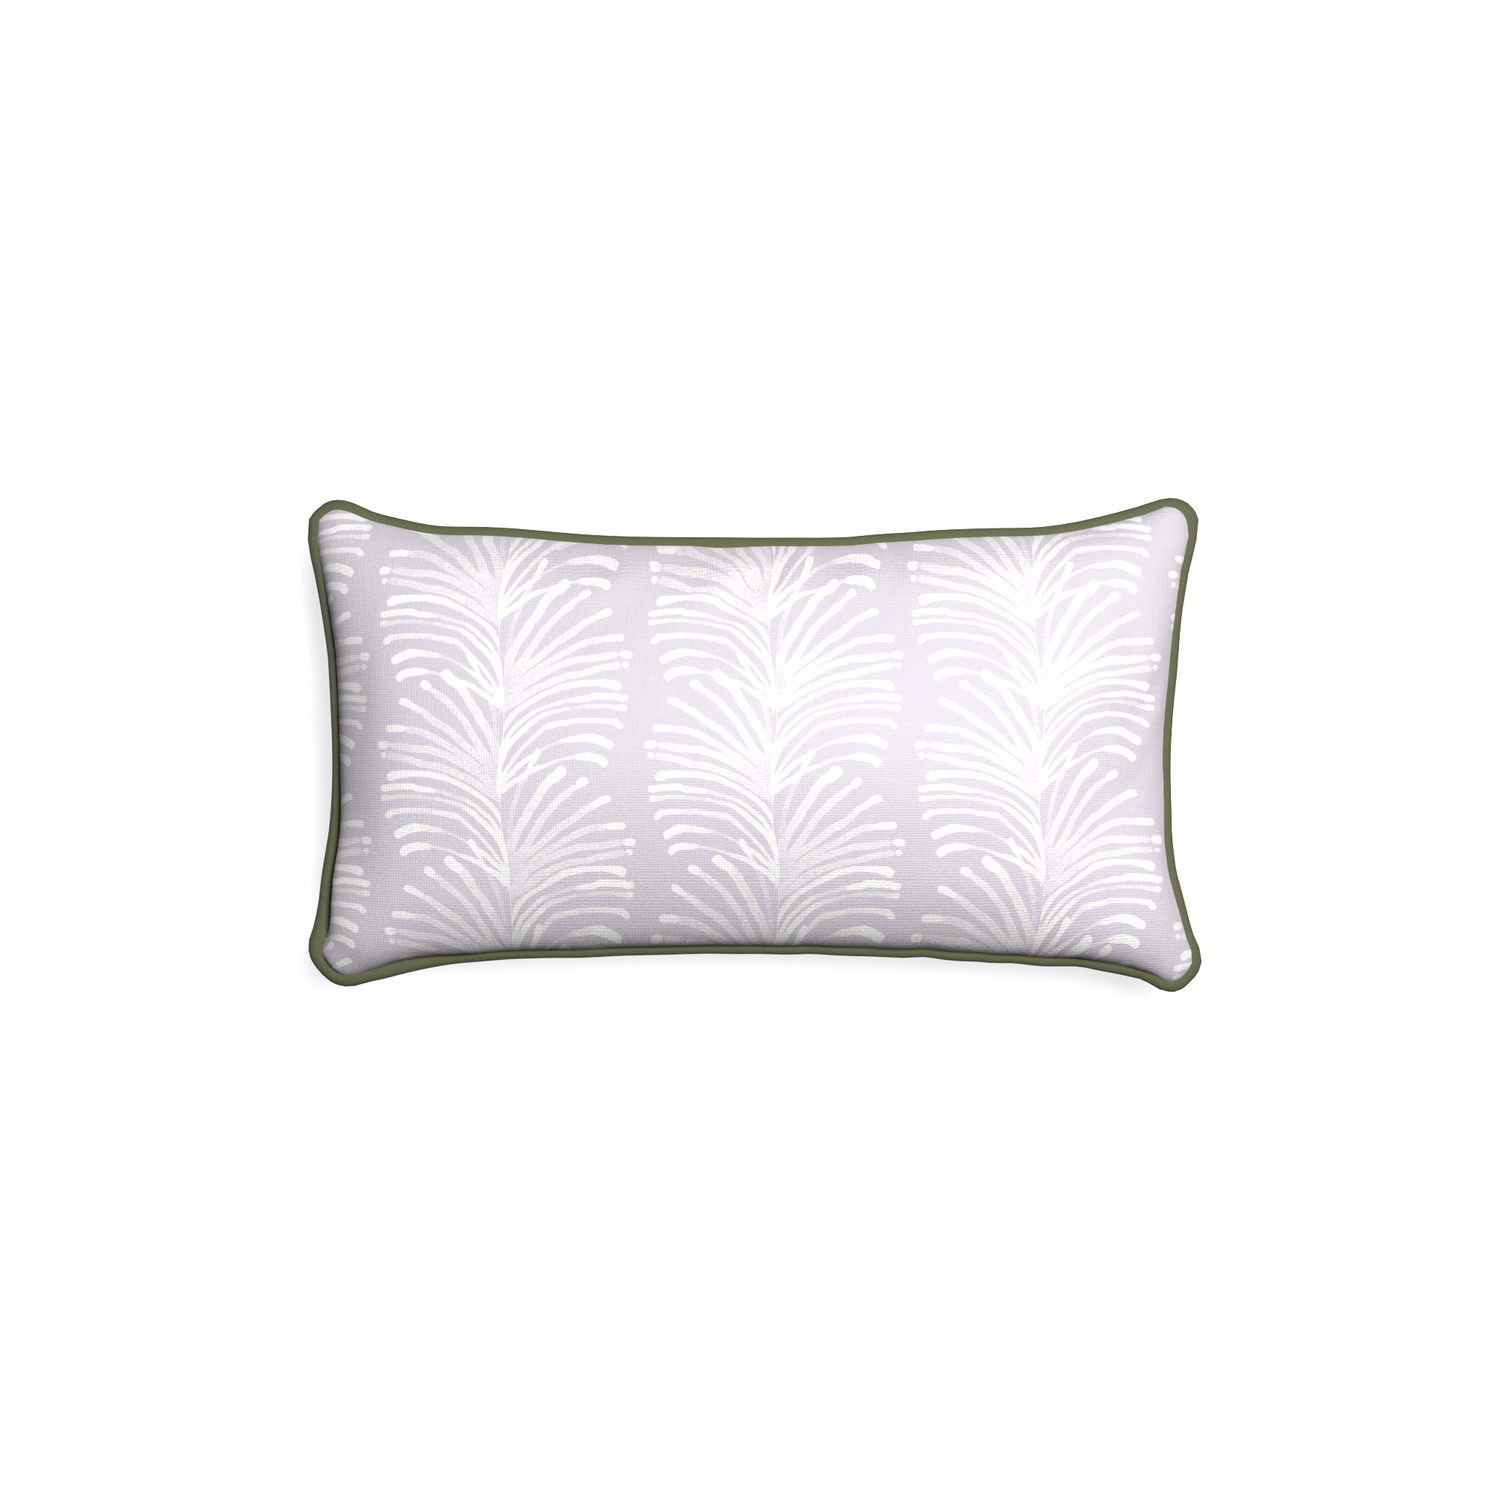 Petite-lumbar emma lavender custom lavender botanical stripepillow with f piping on white background